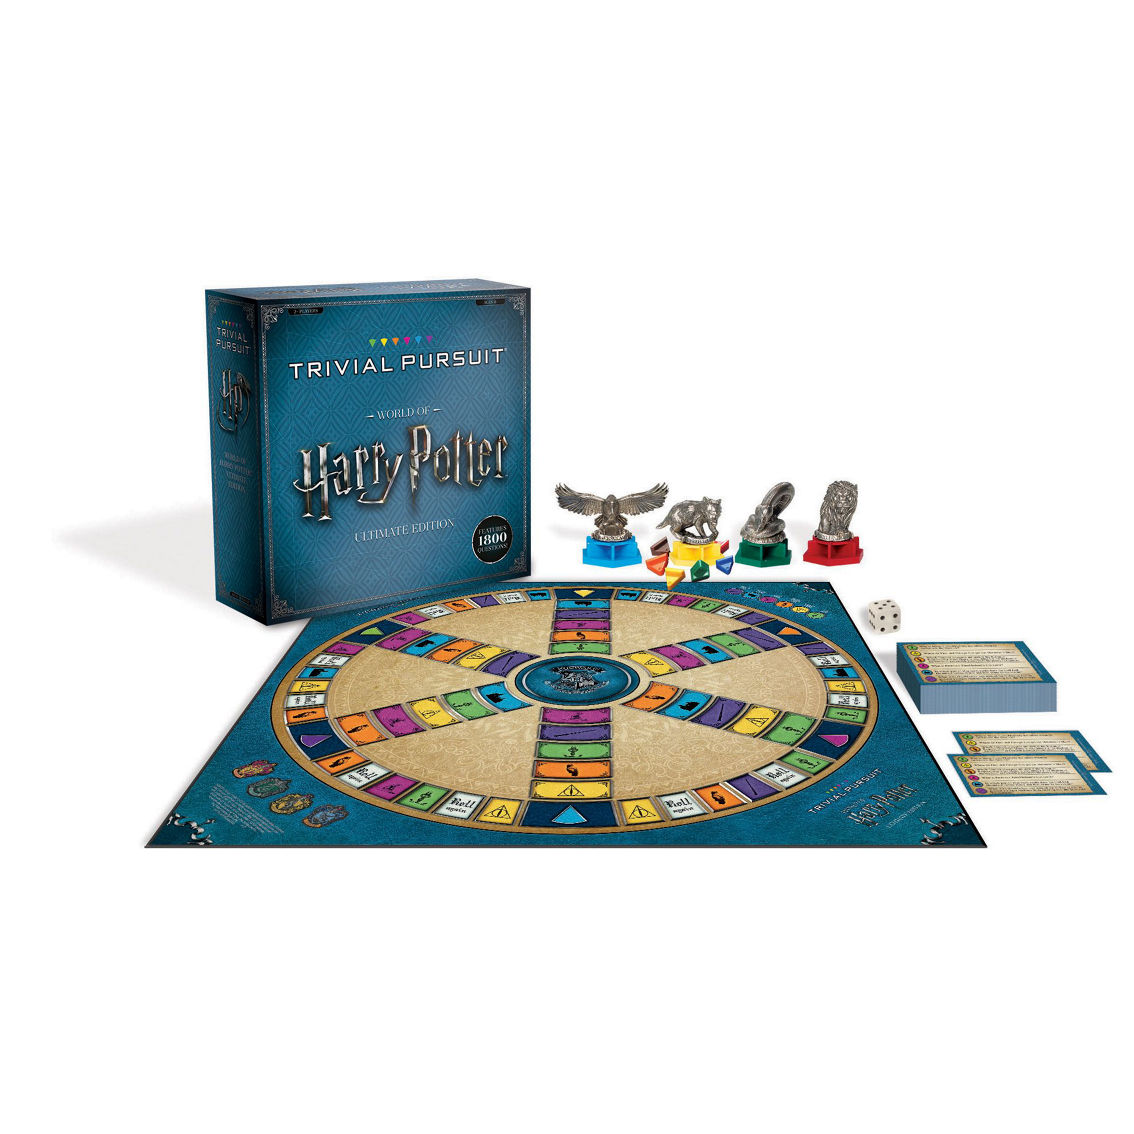 USAopoly Trivial Pursuit - World of Harry Potter Ultimate Edition - Image 3 of 5